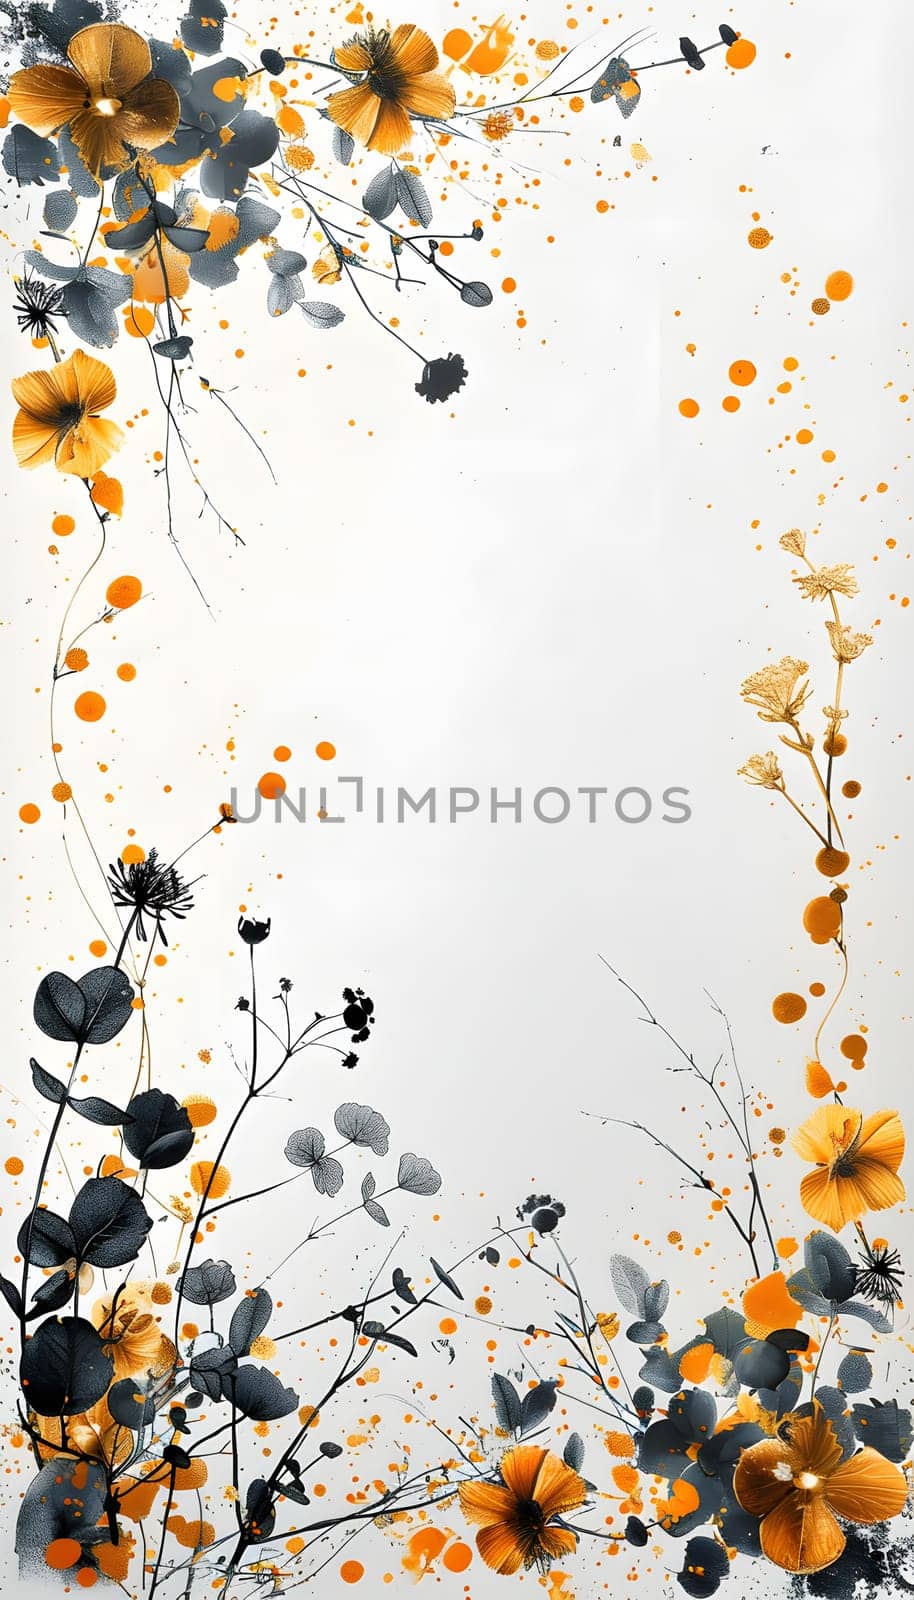 A botanical art piece featuring yellow and black flowers on a white canvas by Nadtochiy